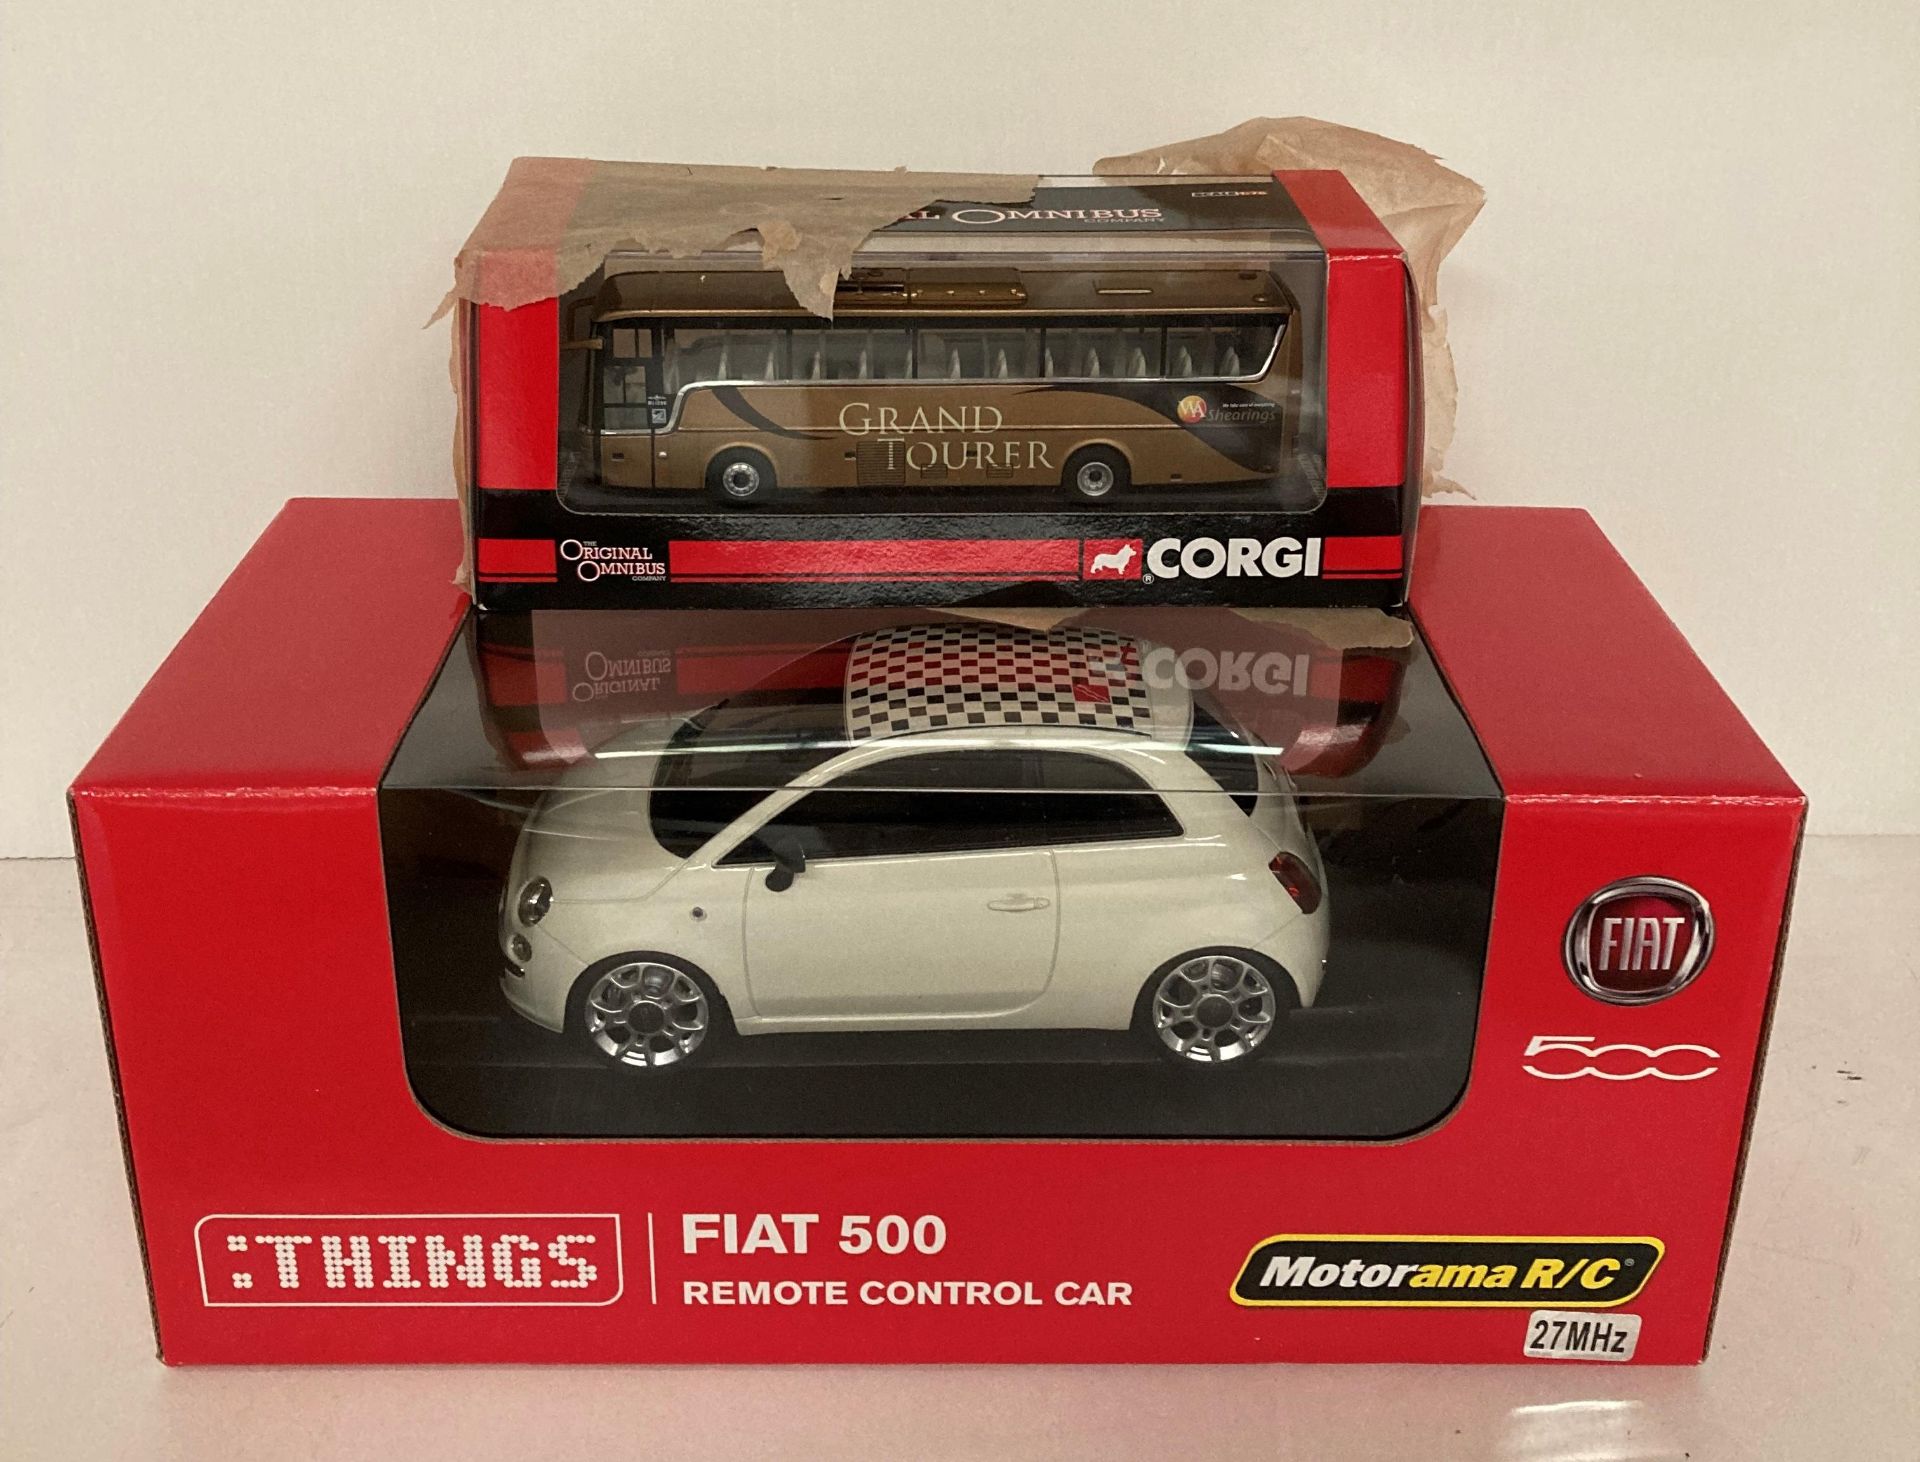 Fiat 500 remote control car by Motorama R/C and four assorted diecast metal Fiat's, - Image 4 of 4